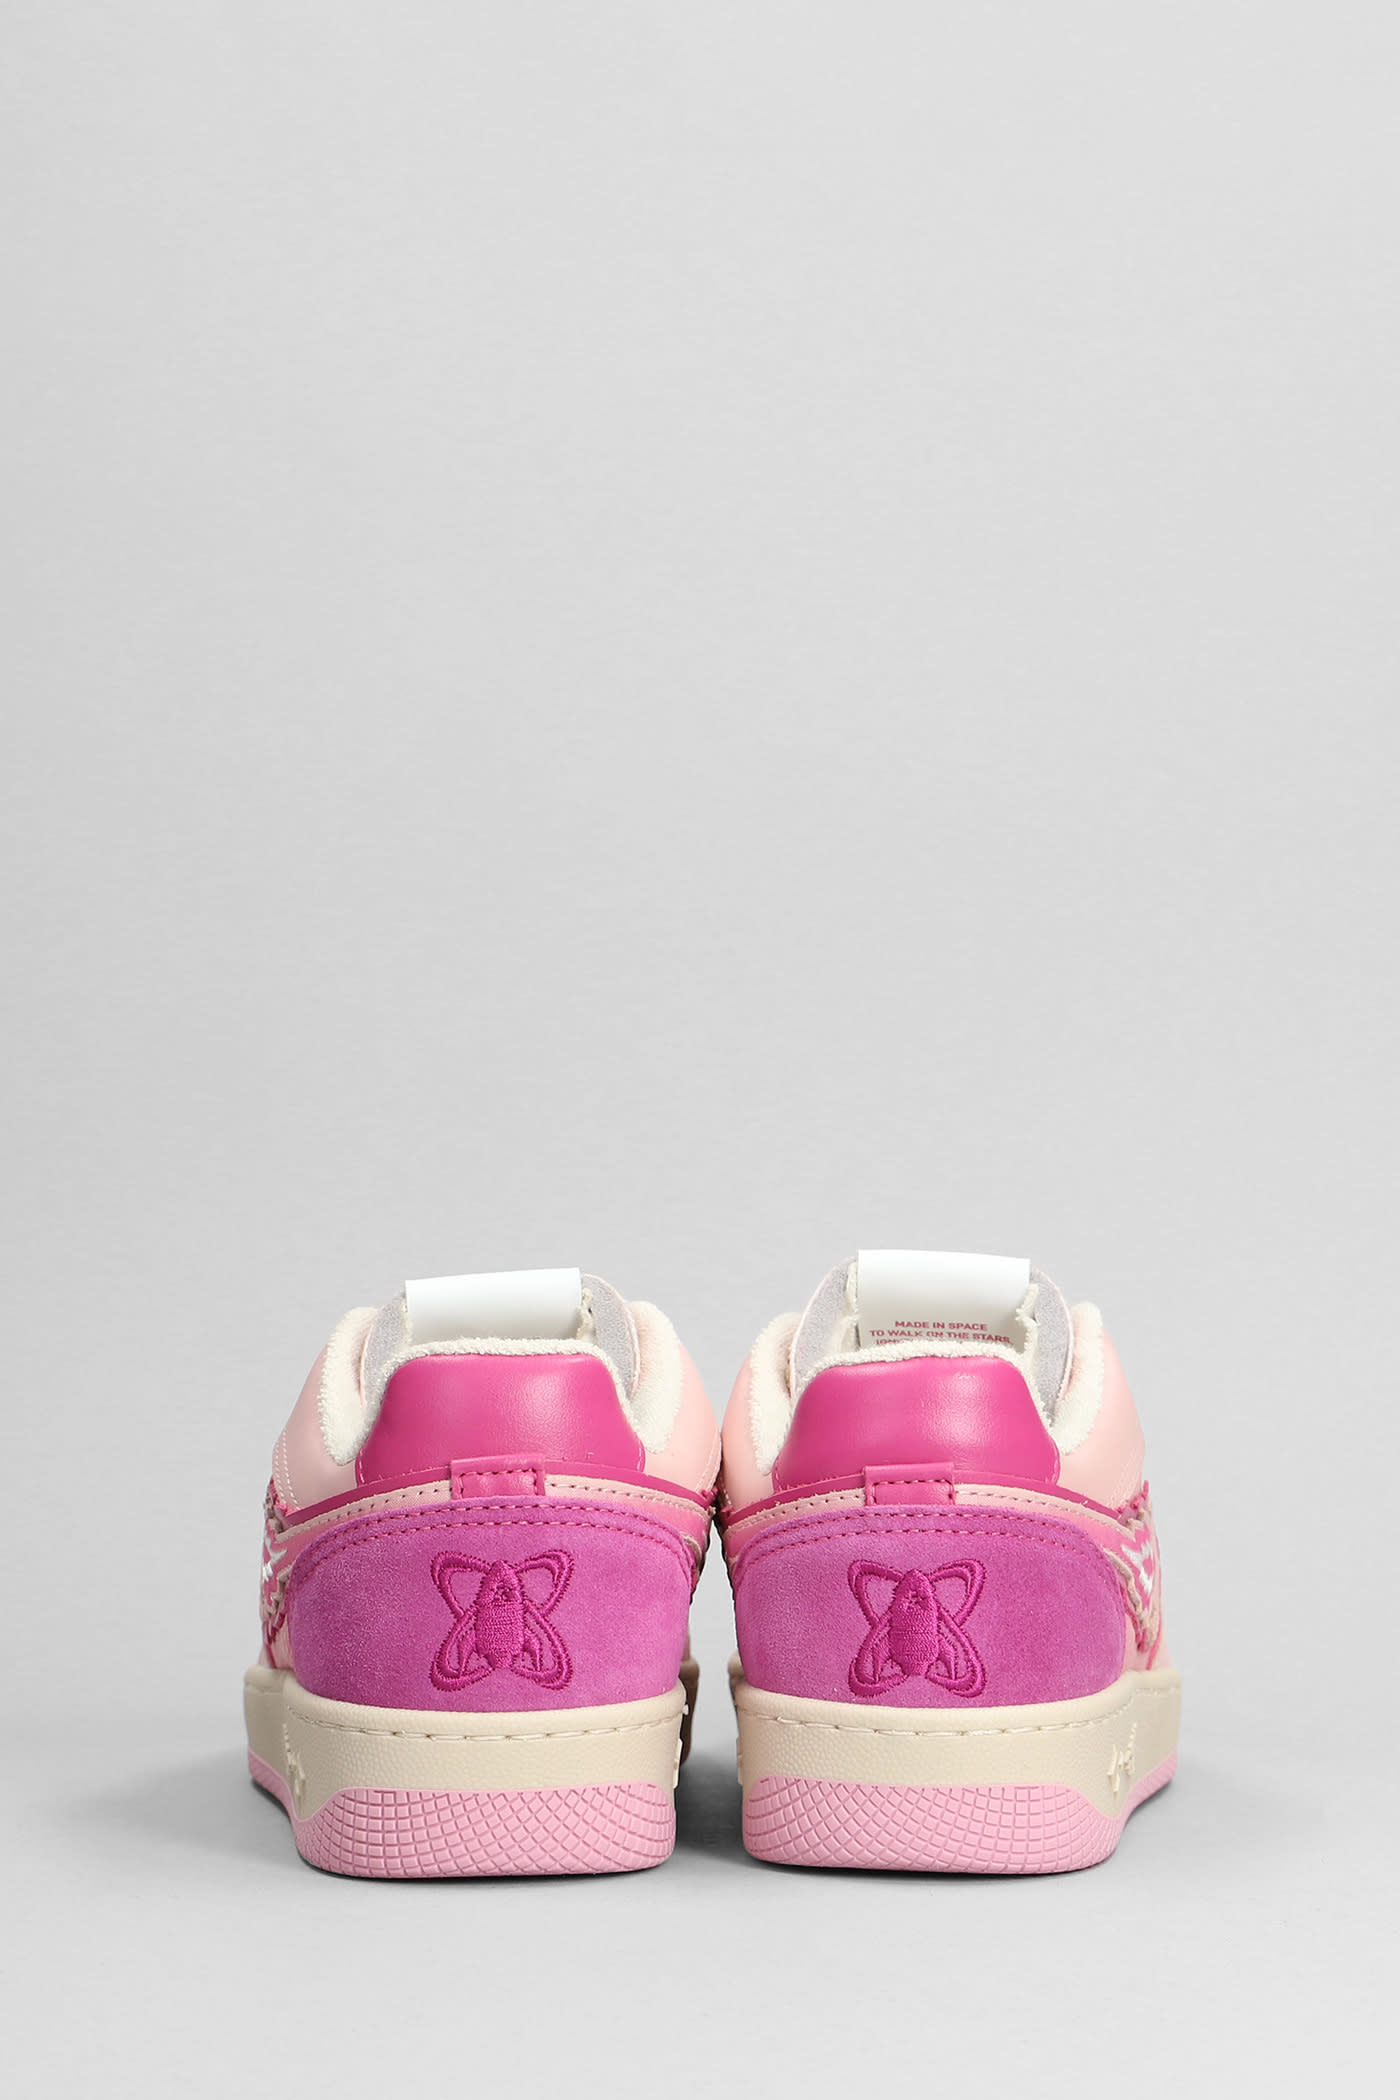 Shop Enterprise Japan Sneakers In Rose-pink Suede And Leather